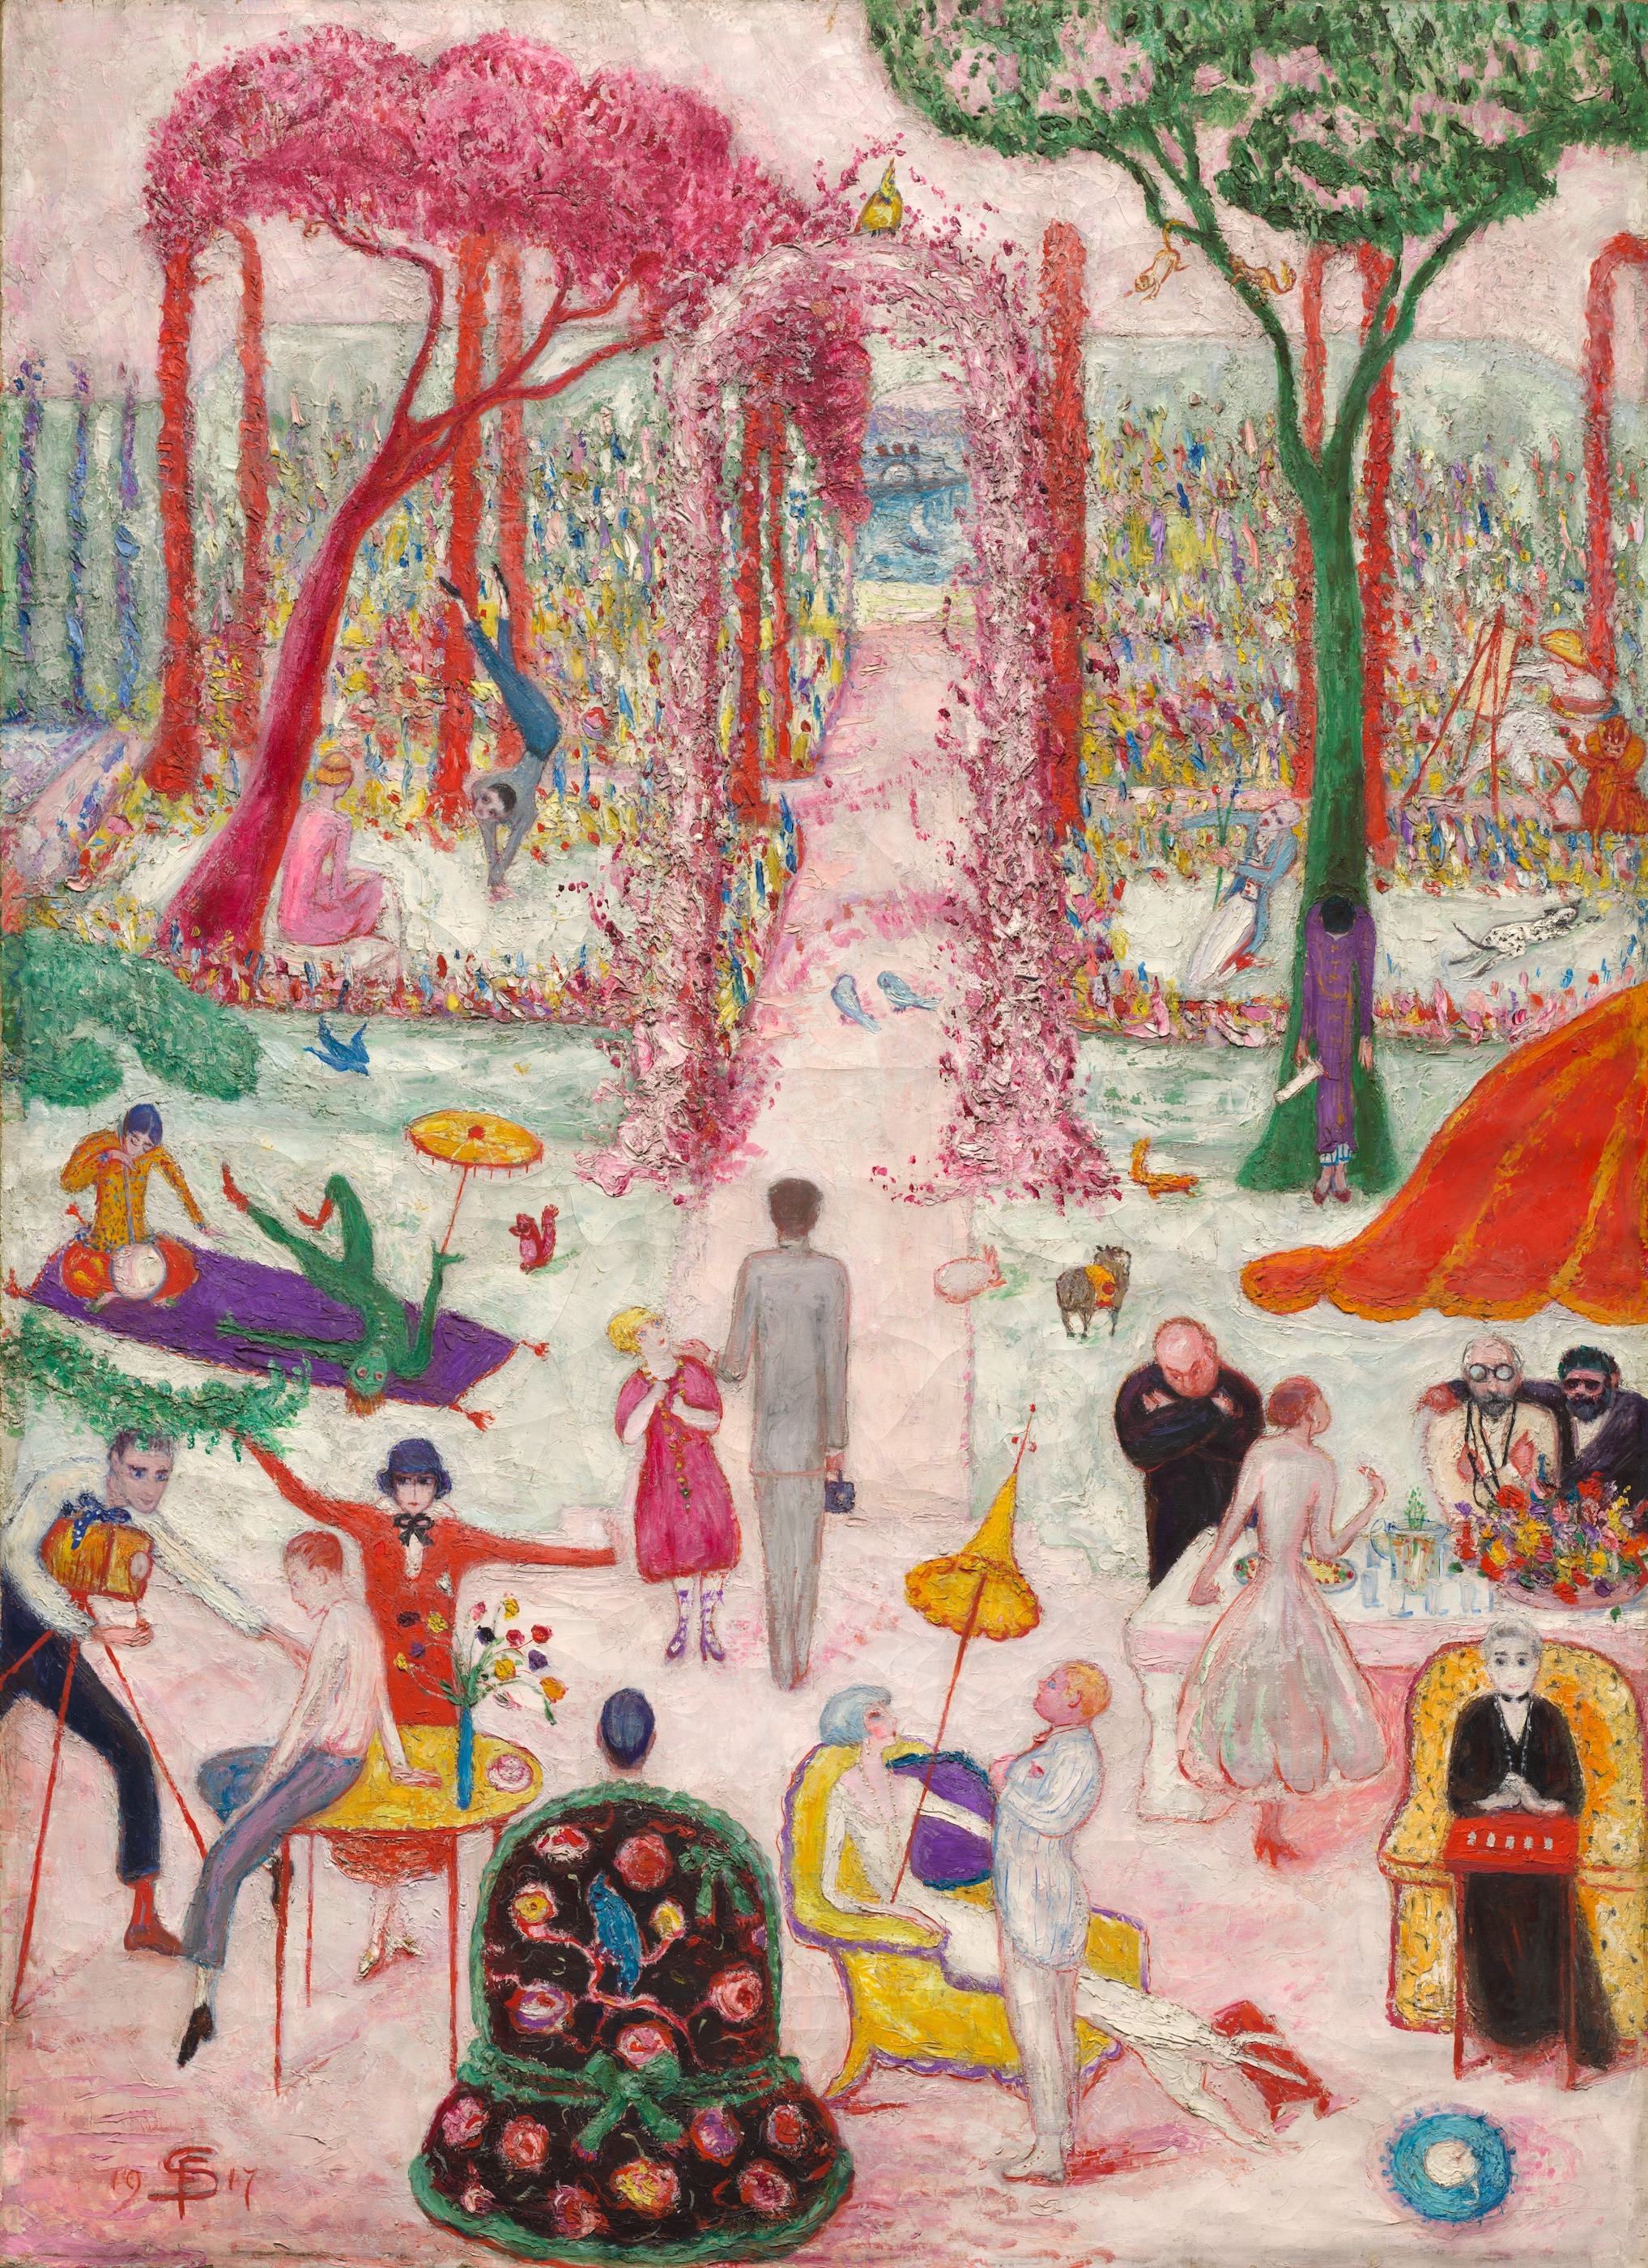 Sunday Afternoon in the Country by Florine Stettheimer - 1917 - 128 x 92.5 cm Cleveland Museum of Art